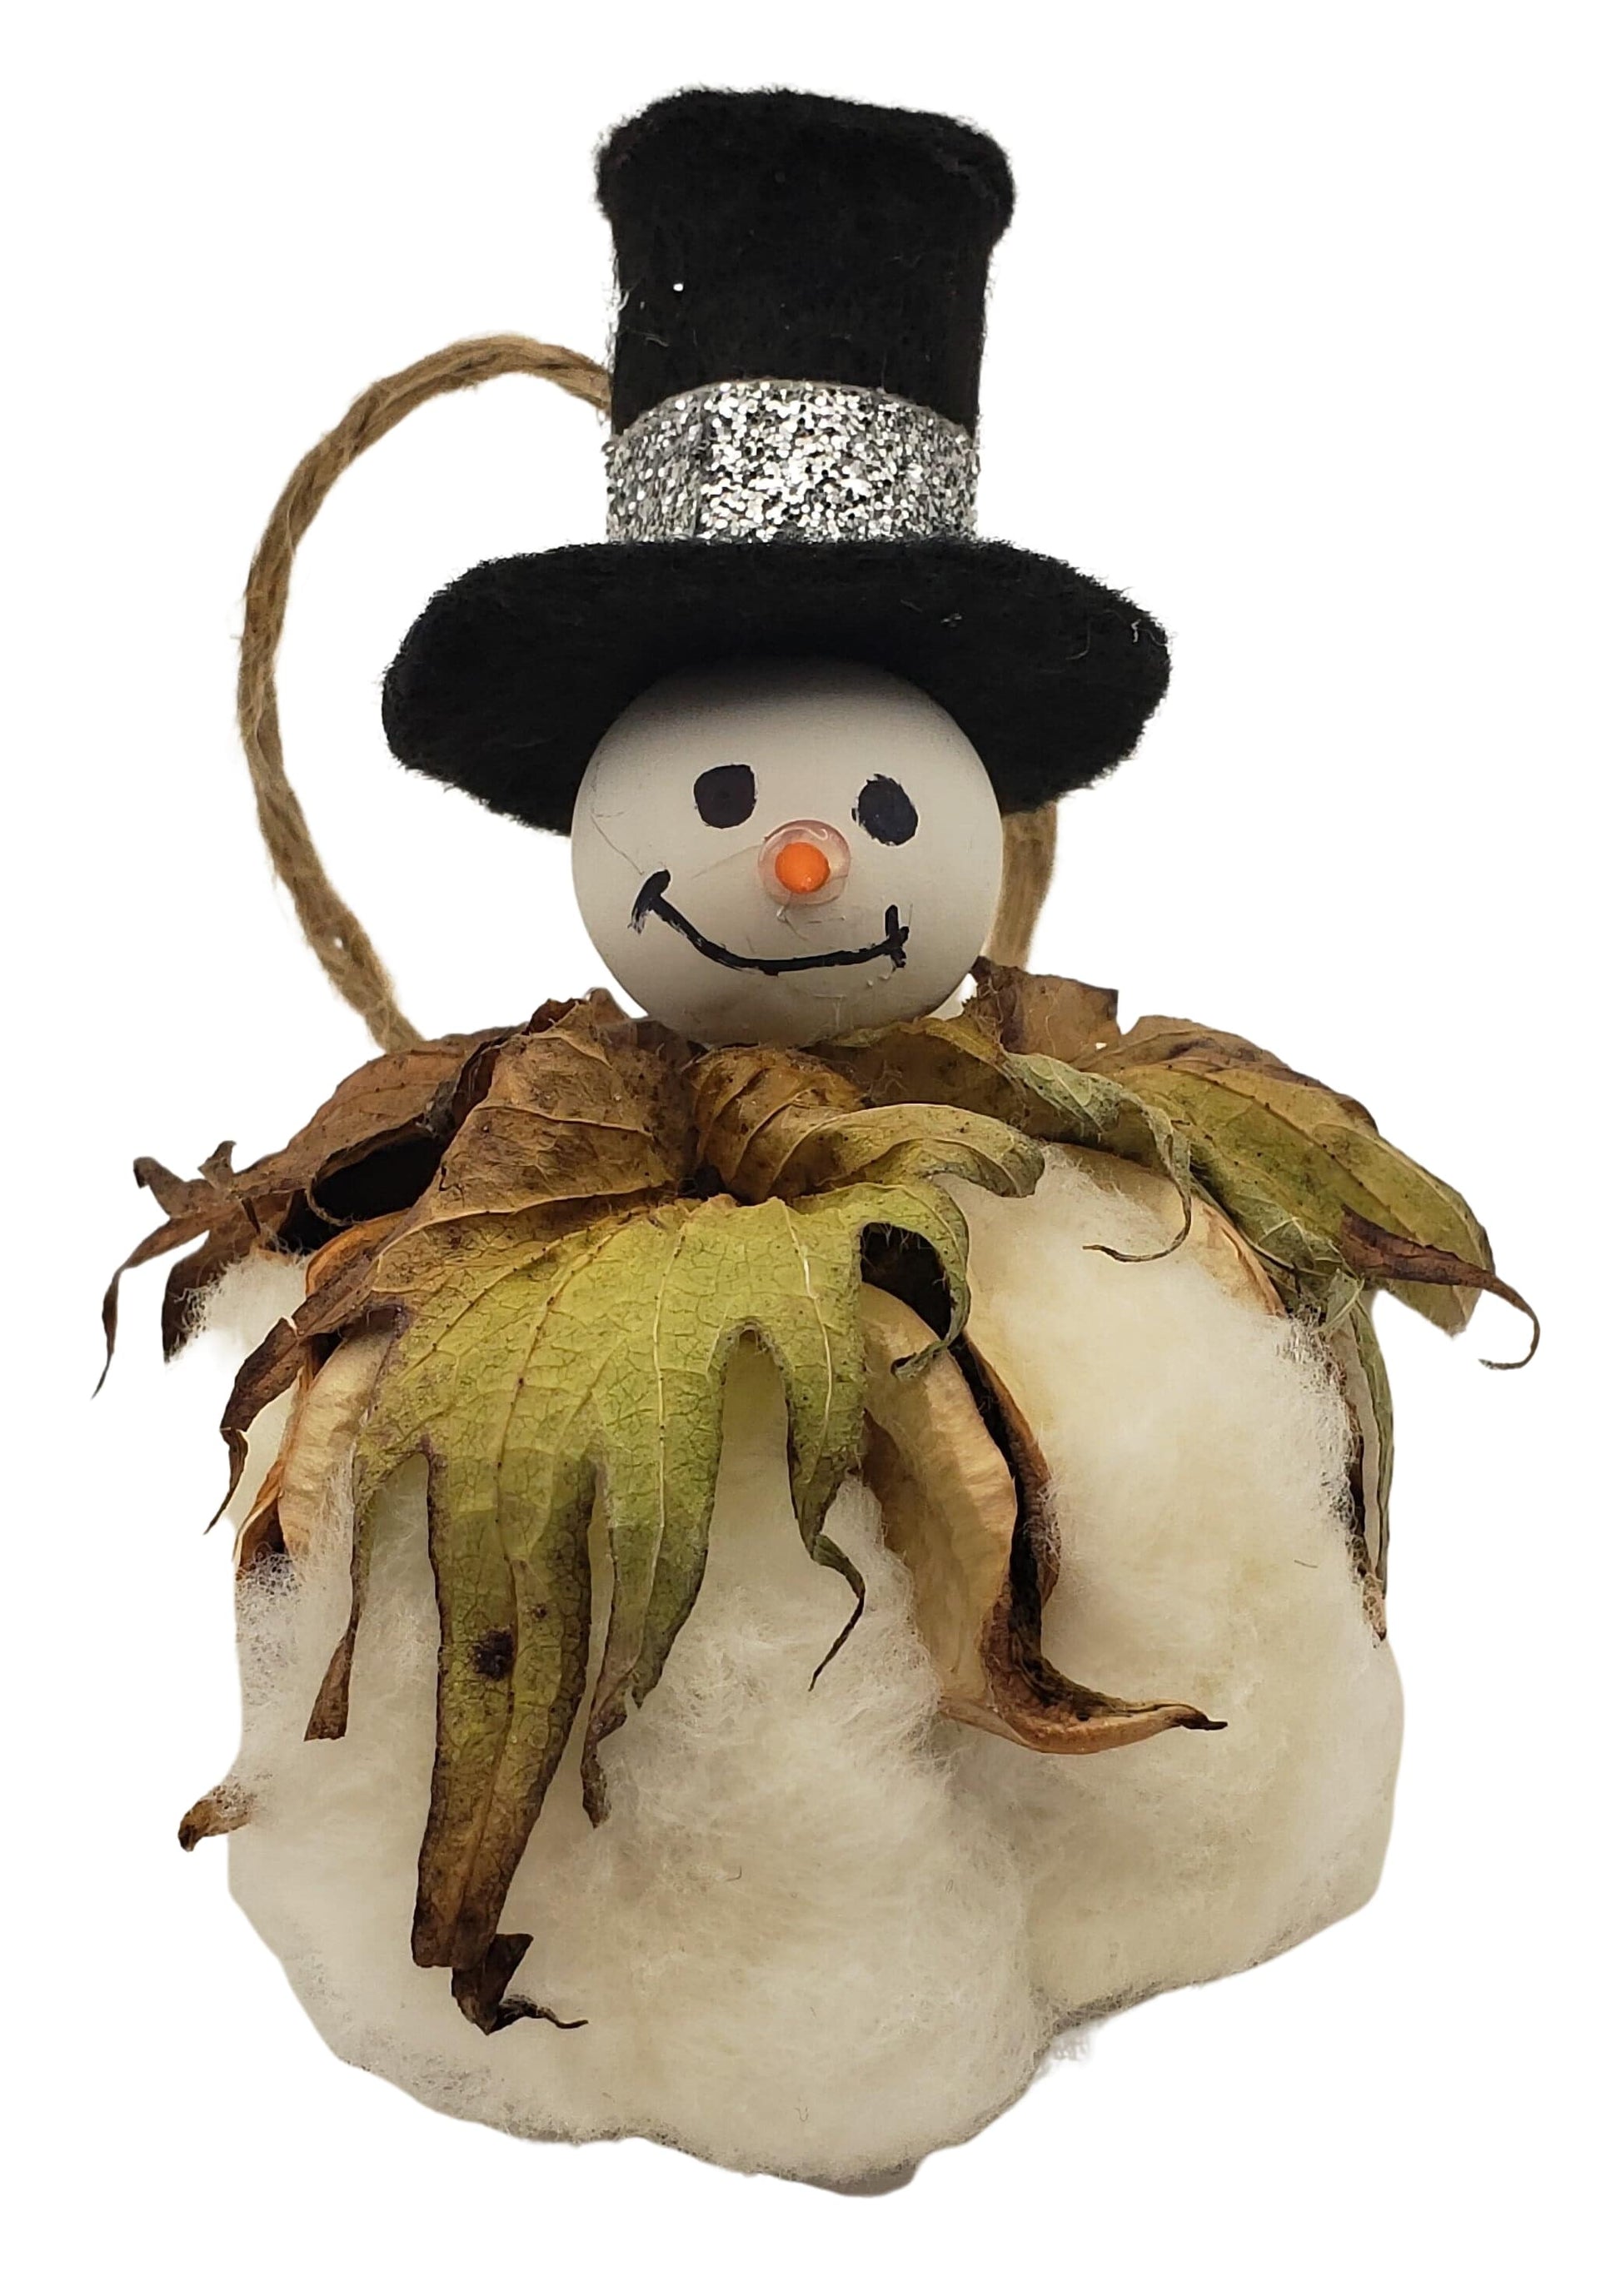 Natures Christmas - cotton boll snowman Christmas tree ornament with black top hat and silver hat scarf